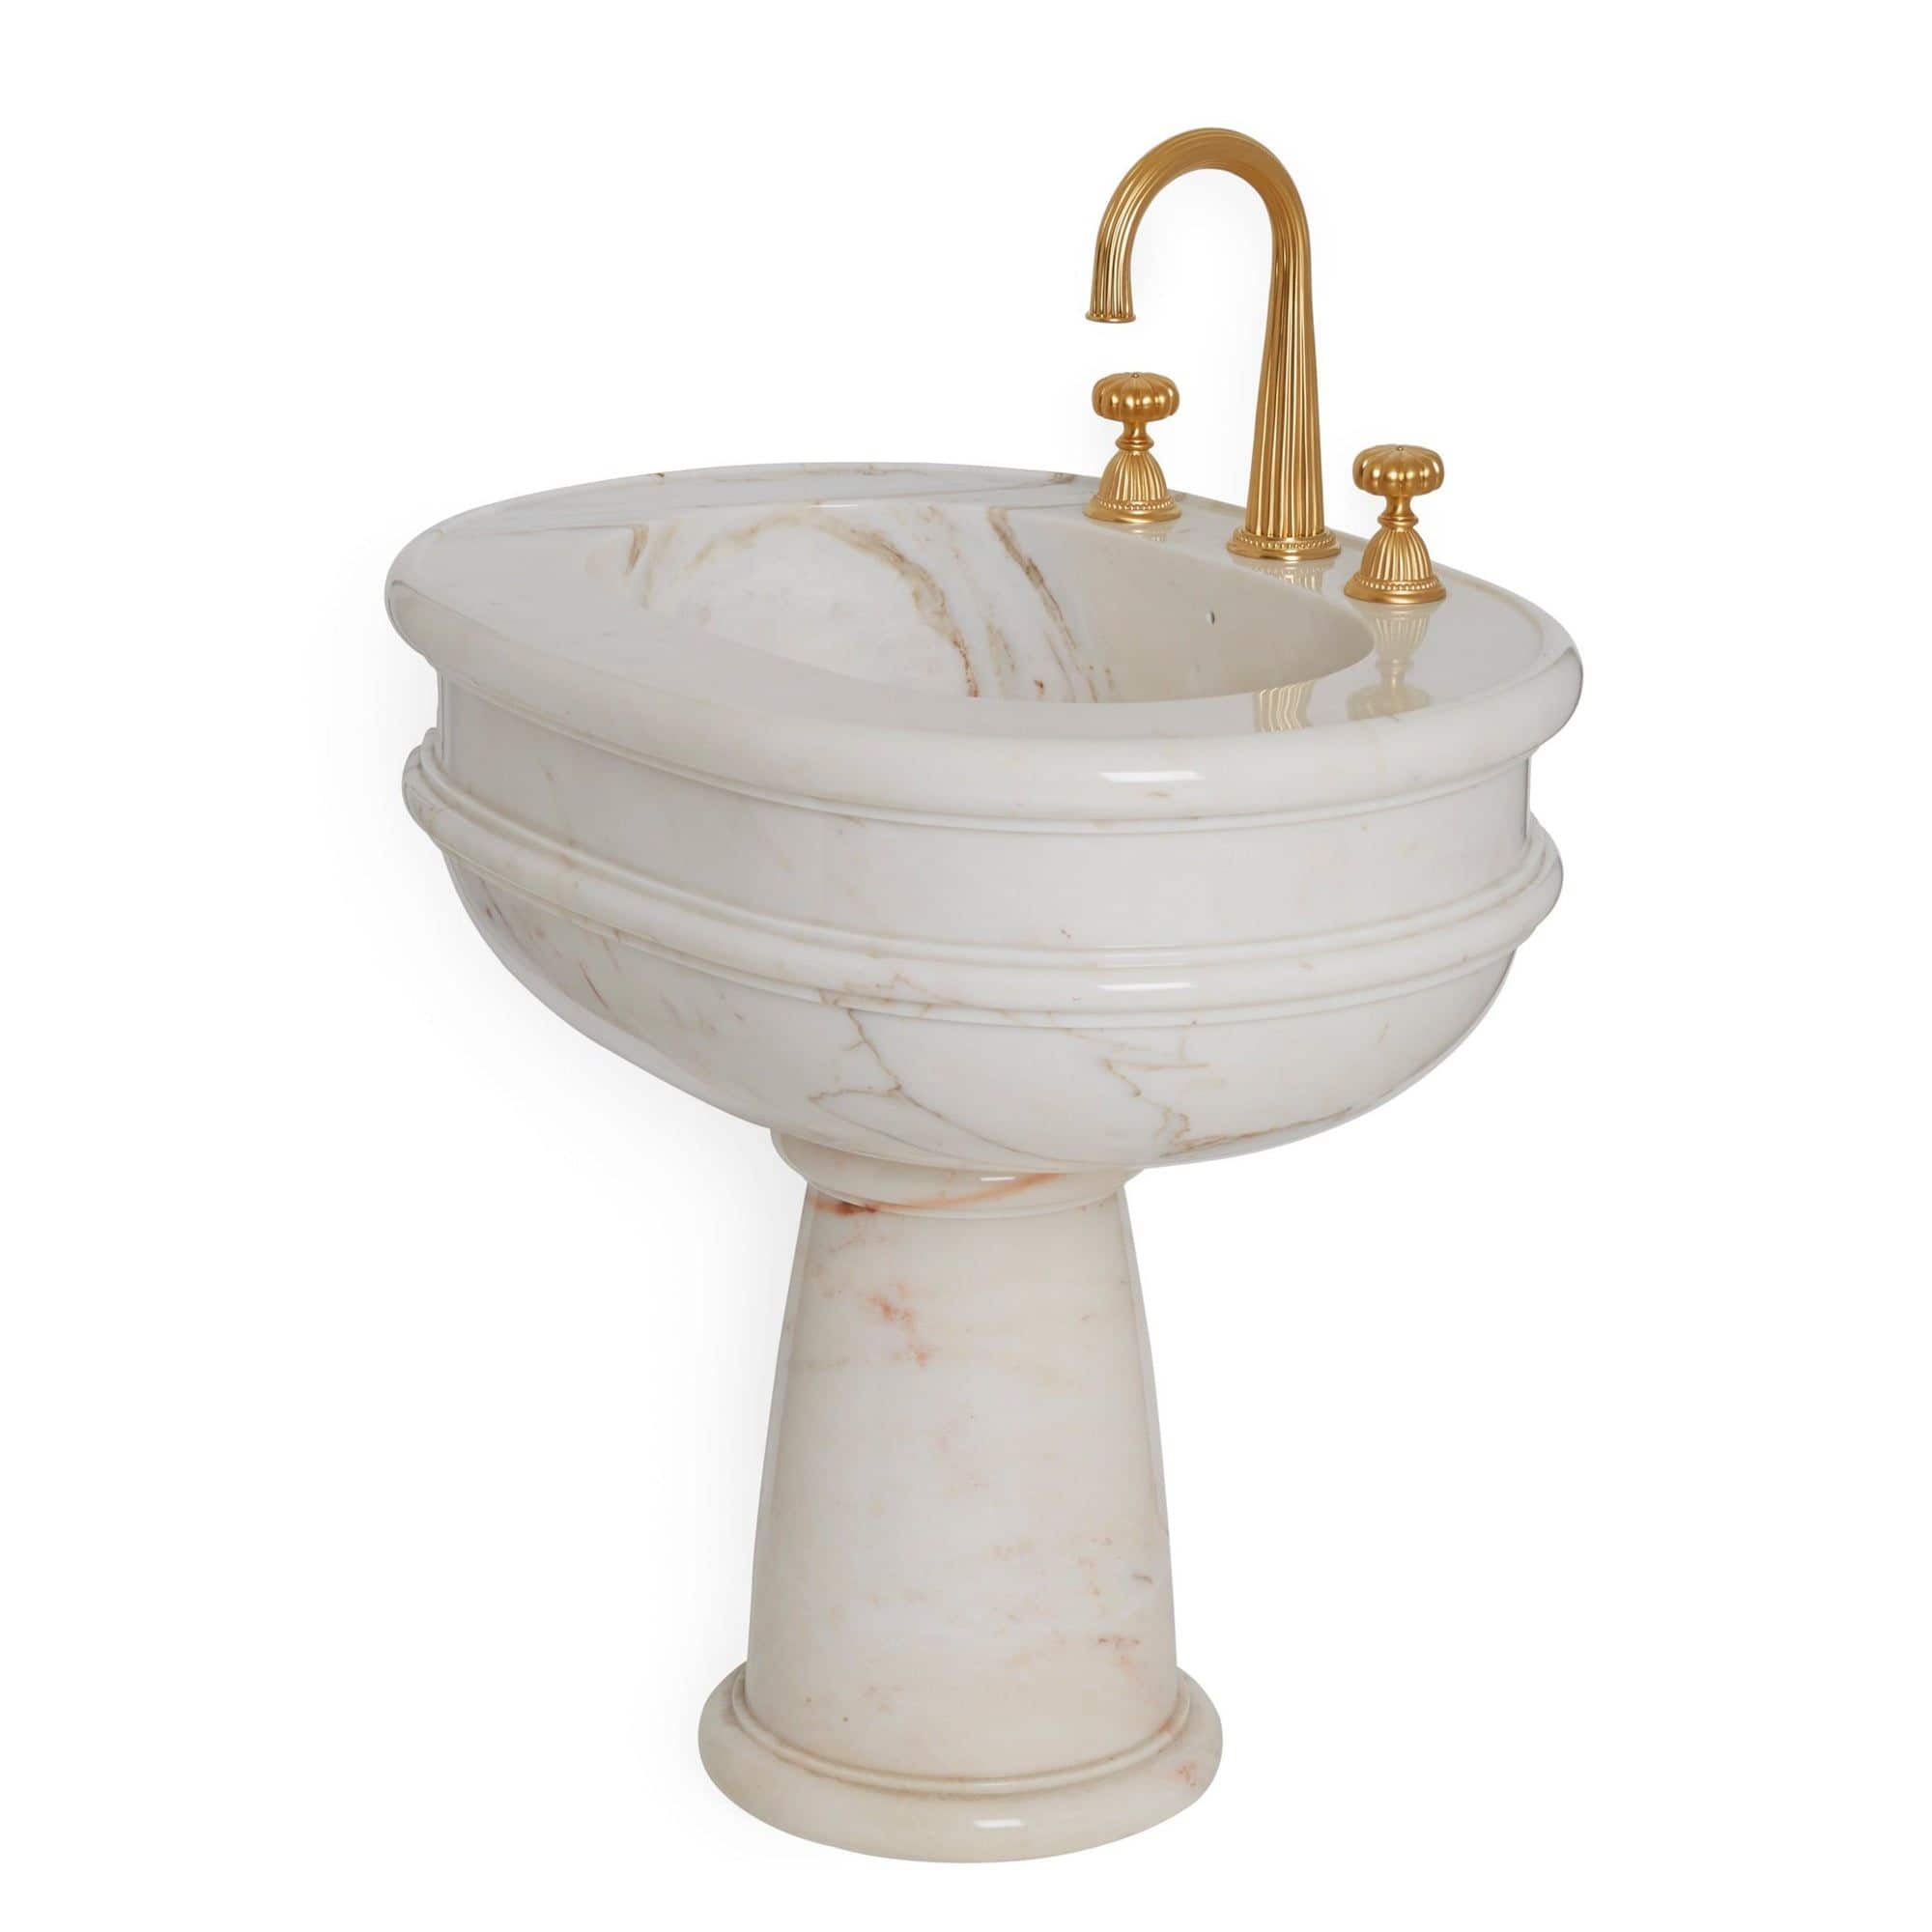 Luxurious gold and marble bathroom sink by Sherle Wagner.